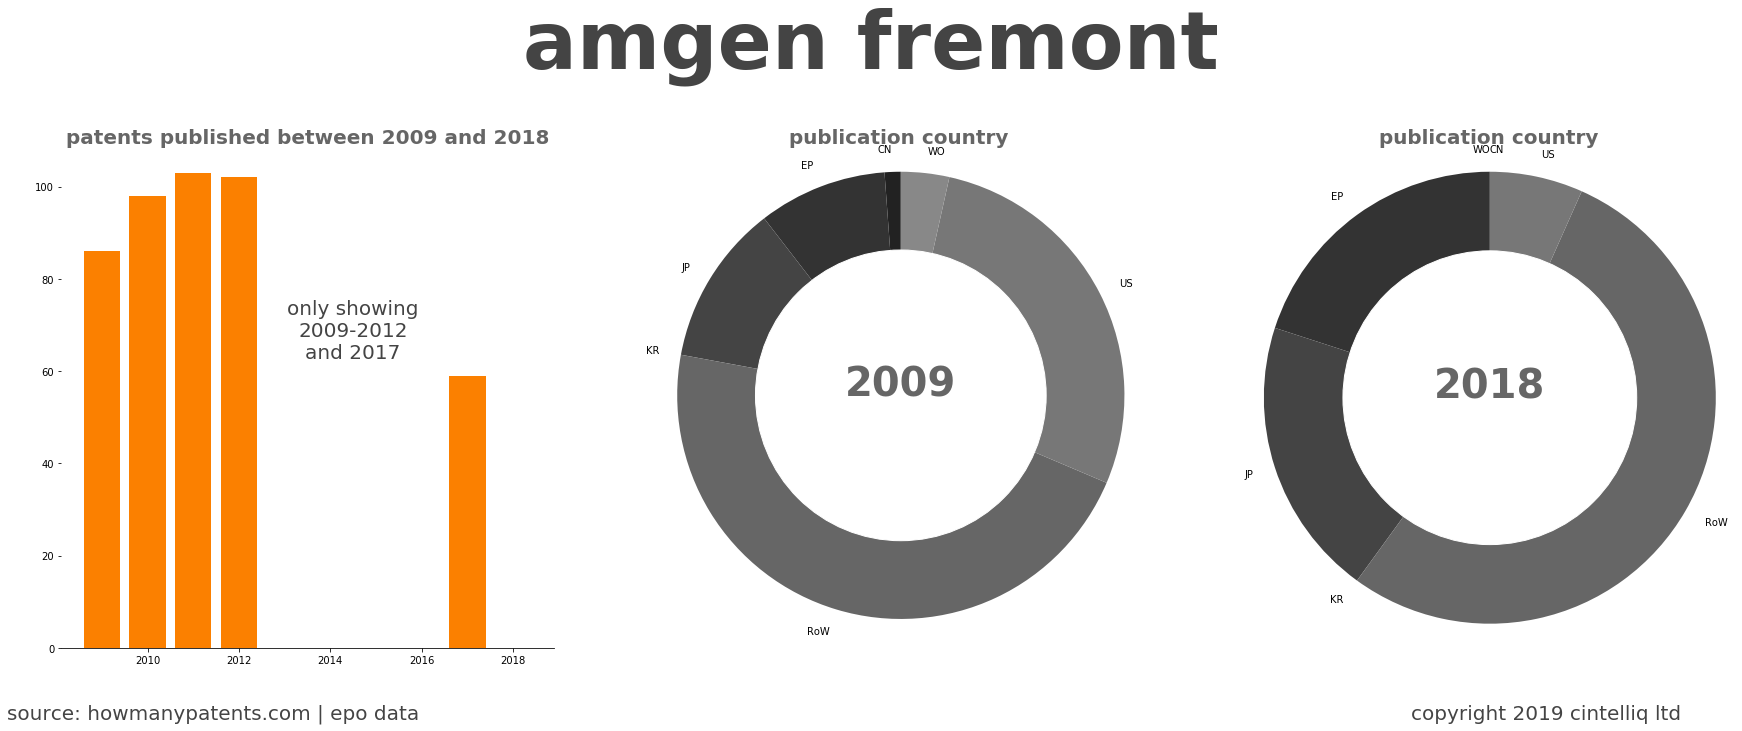 summary of patents for Amgen Fremont